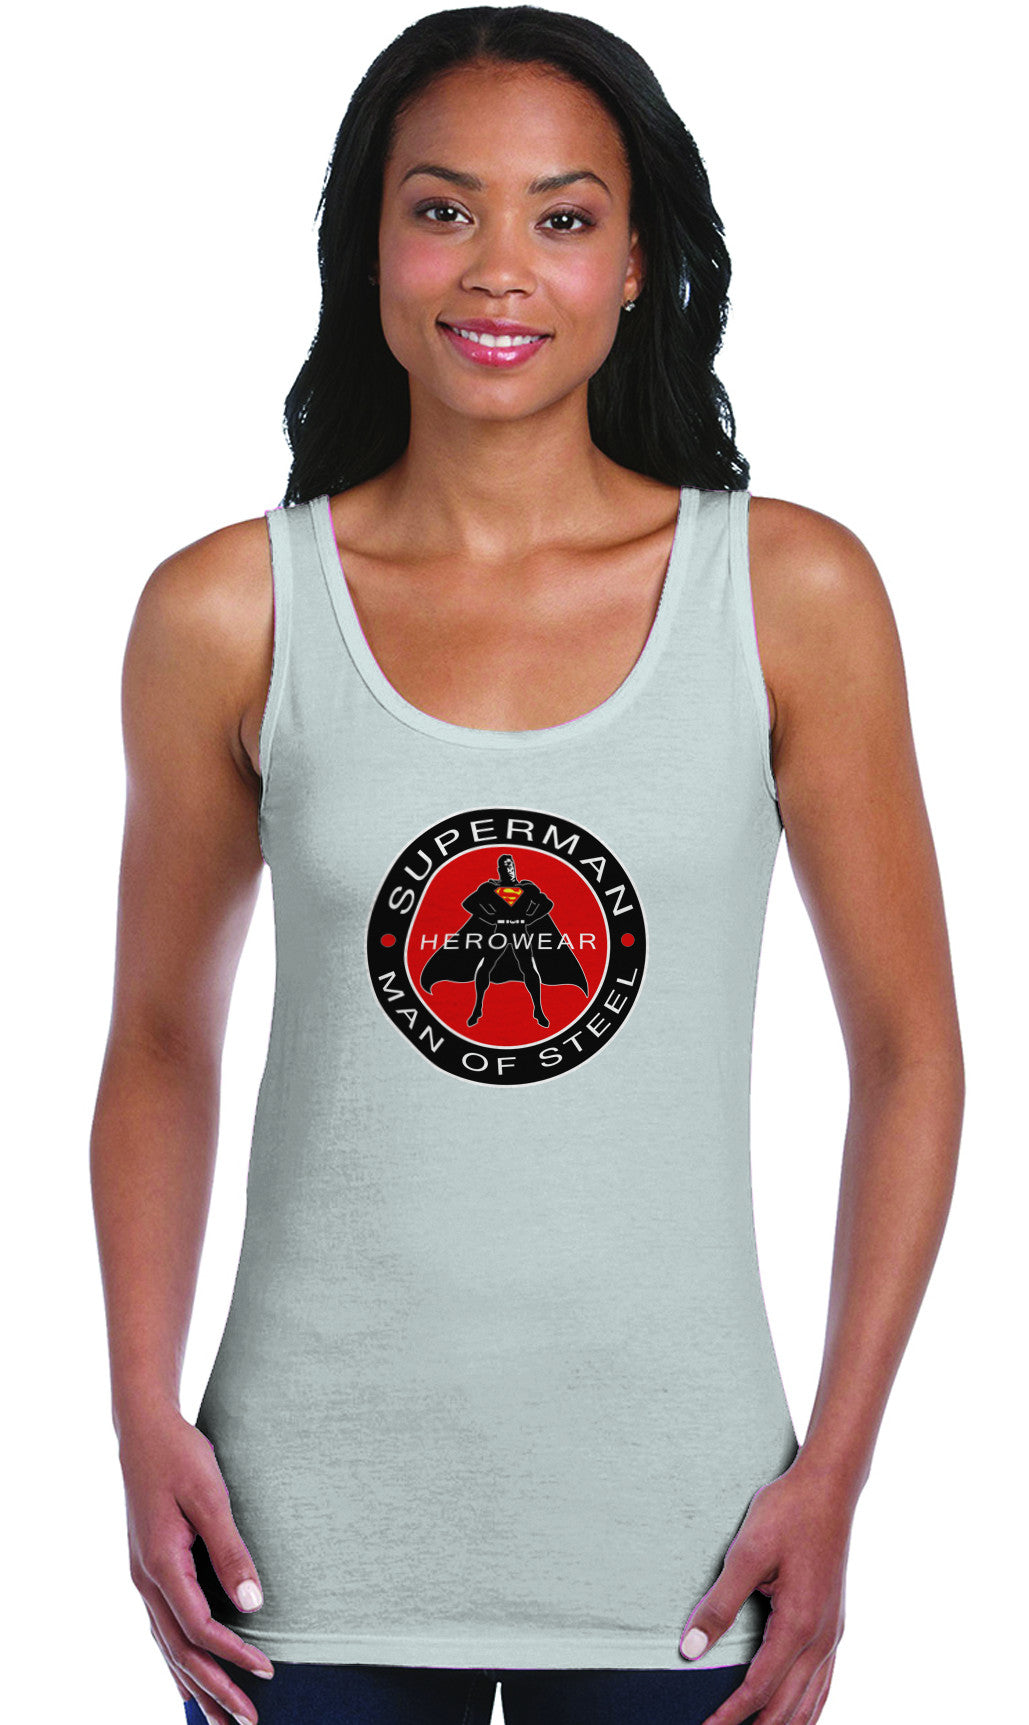 Superman Herowear Round Logo on Ash Gray Fitted Sheer Tank Top for Women - TshirtNow.net - 1